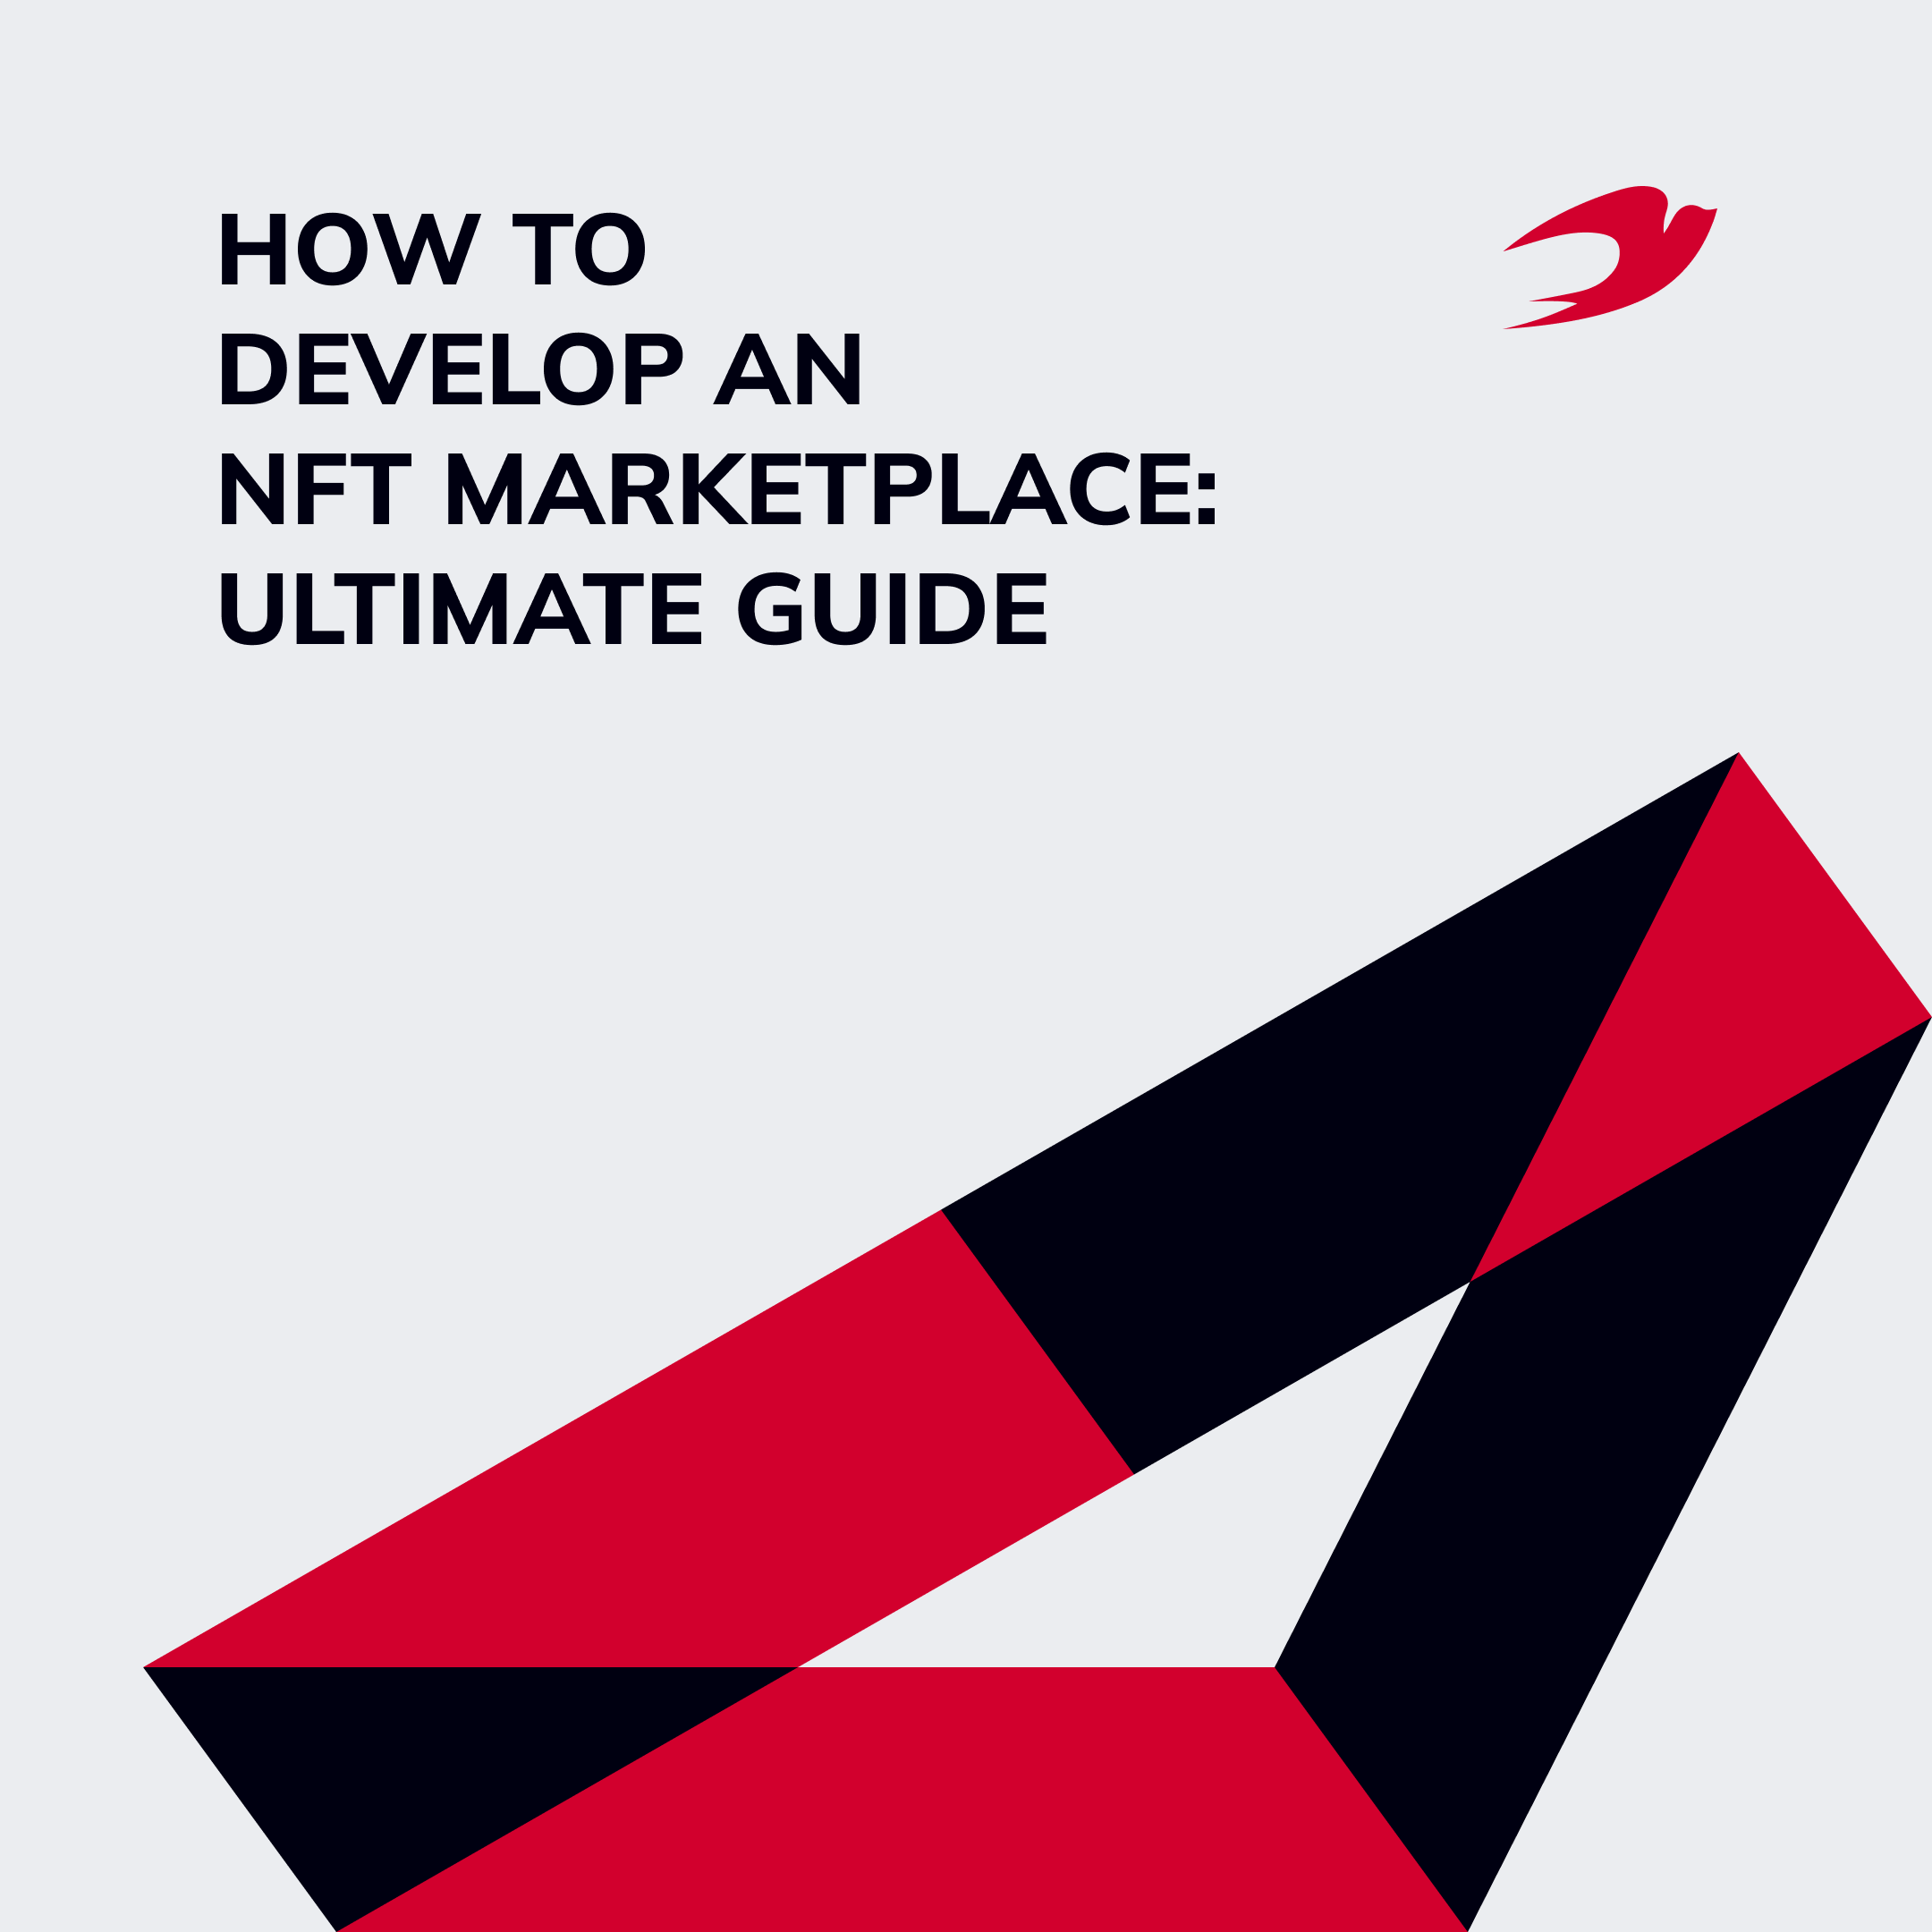 How to Develop an NFT Marketplace: Ultimate Guide